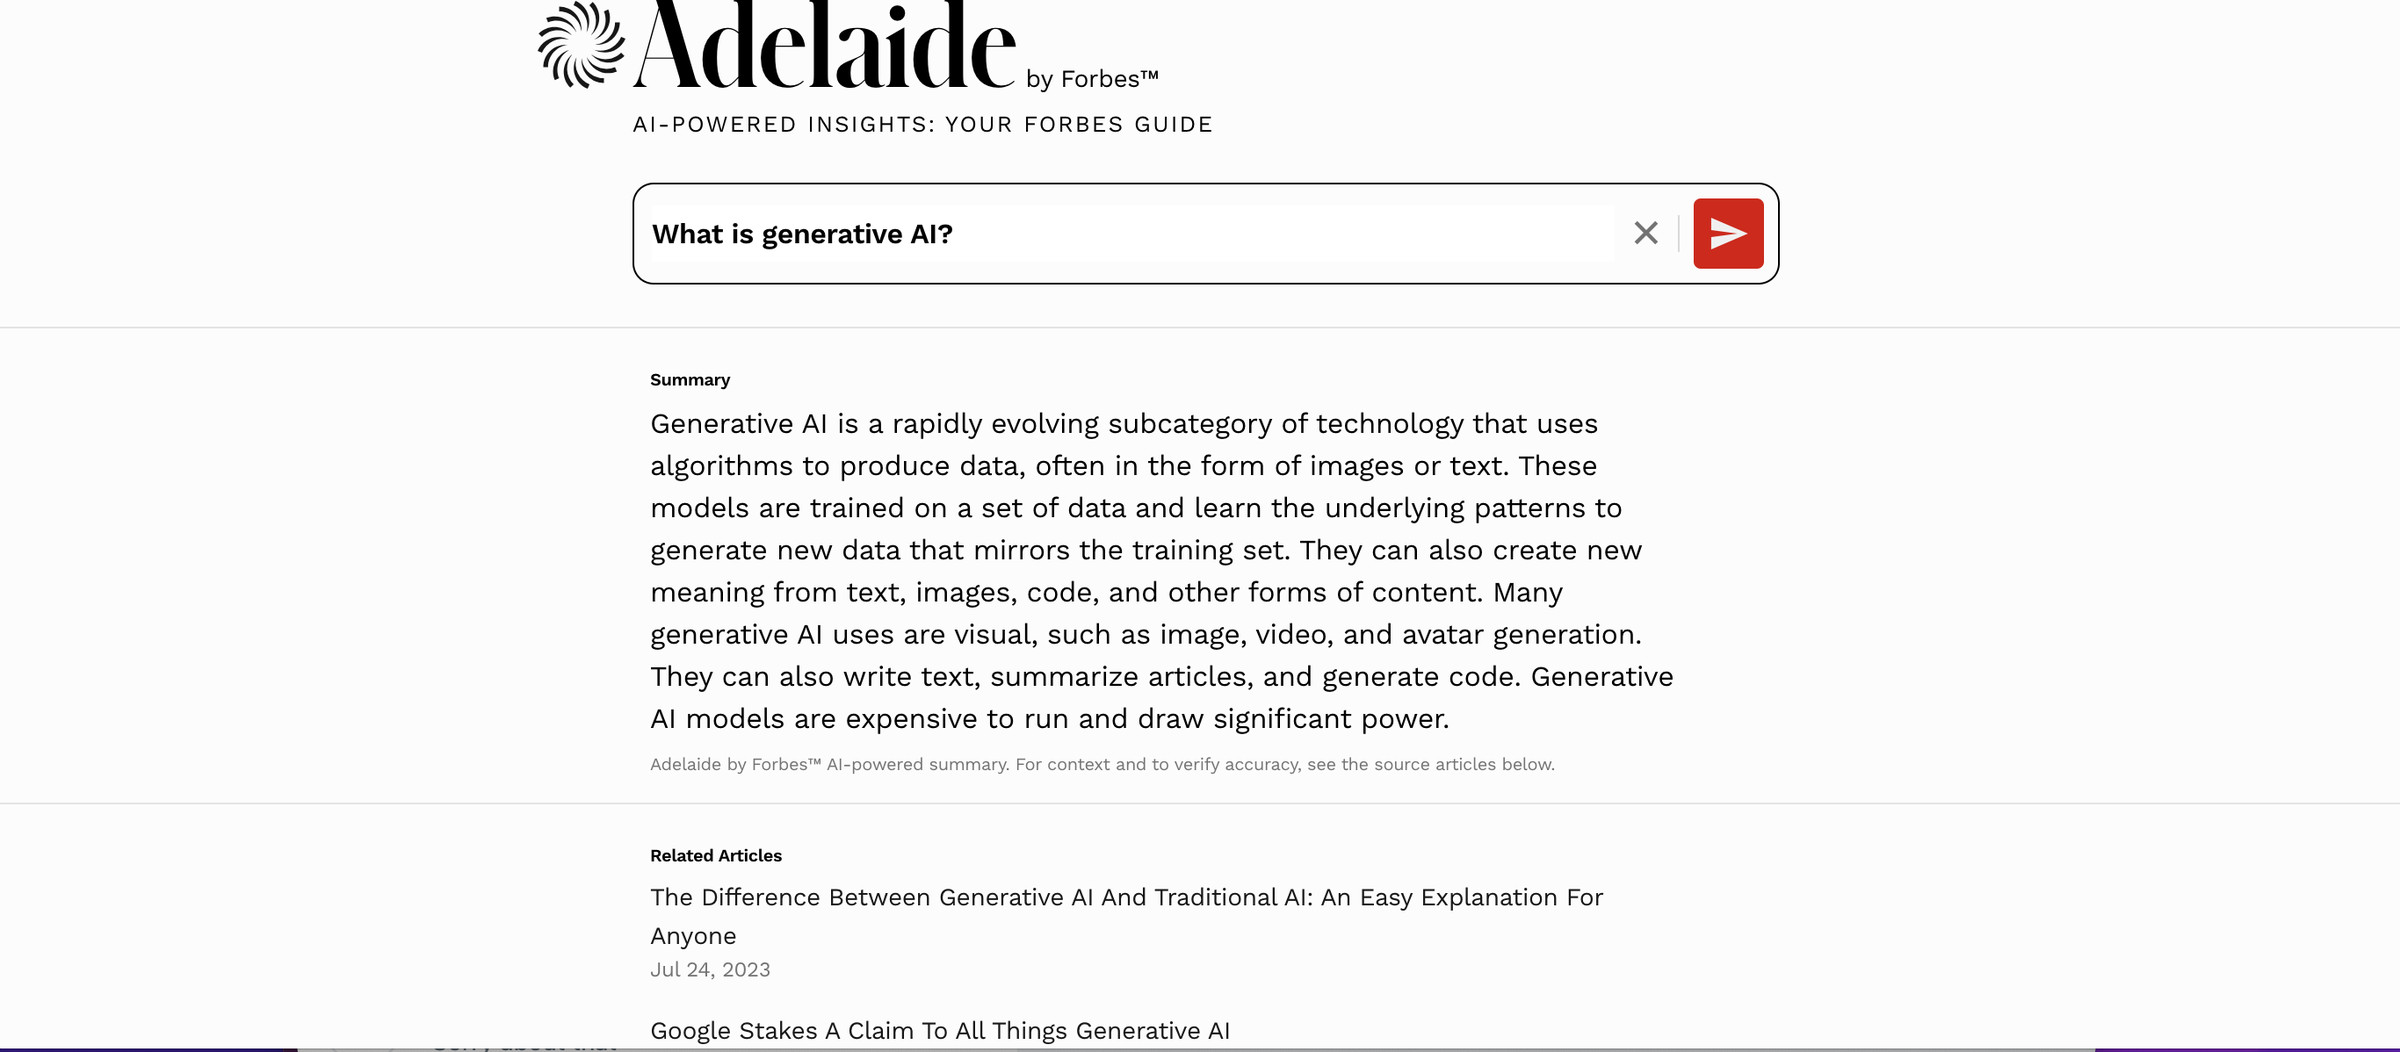 Screenshot of Adelaide from Forbes